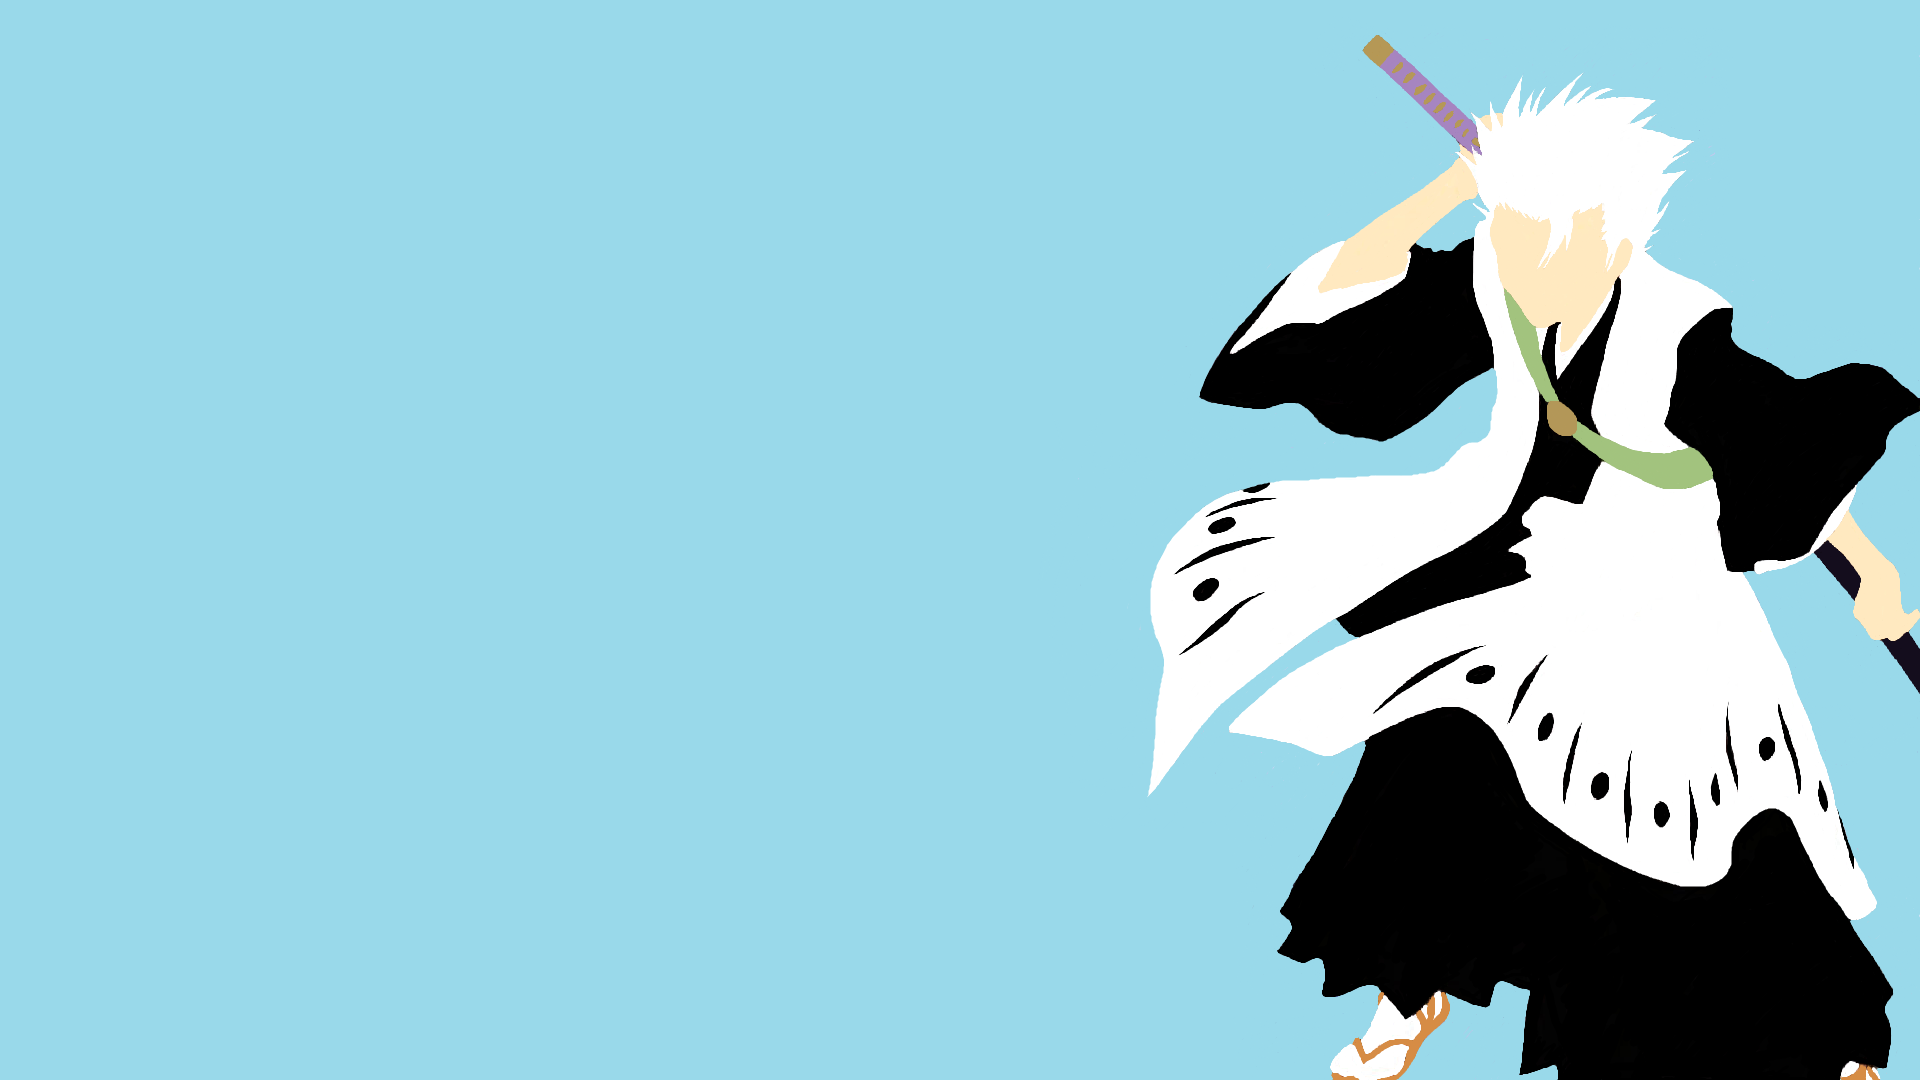 Free download Toshiro Hitsugaya Minimalist Wallpaper Bleach by housesofwolves on [1920x1080] for your Desktop, Mobile & Tablet. Explore Bleach Toshiro Hitsugaya Wallpaper. Bleach Toshiro Hitsugaya Wallpaper, Toshiro Hitsugaya Wallpaper, Hitsugaya